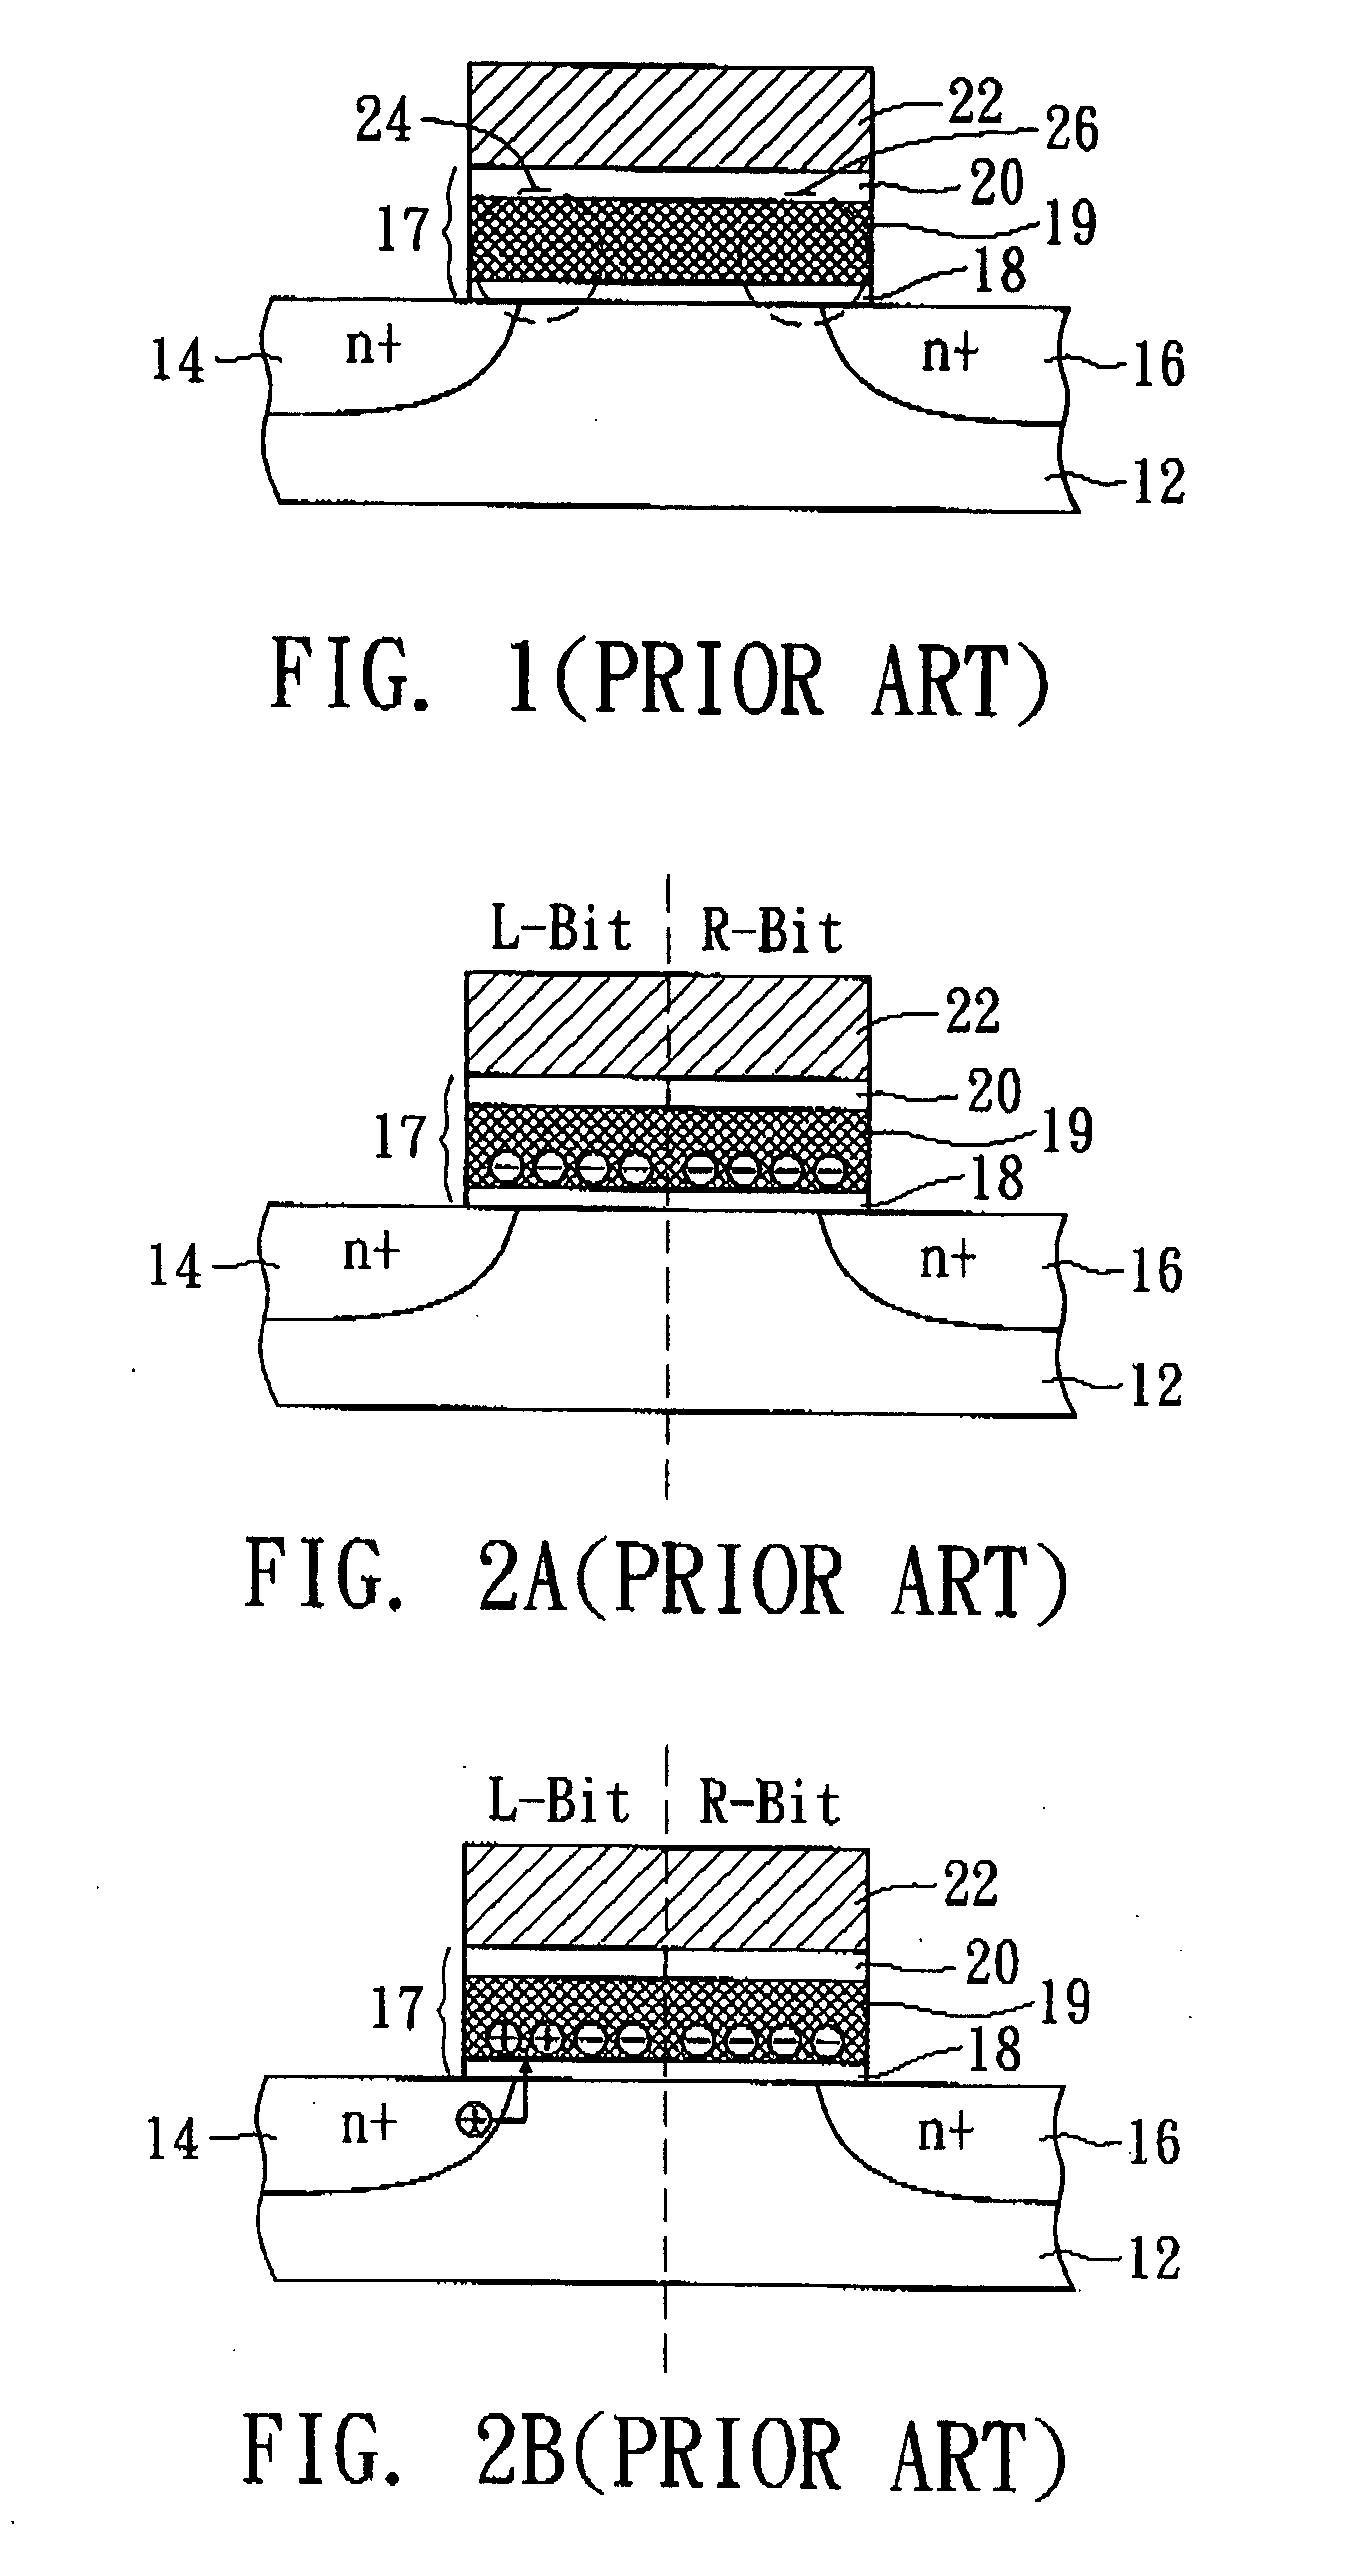 Method of identifying logical information in a programming and erasing cell by on-side reading scheme